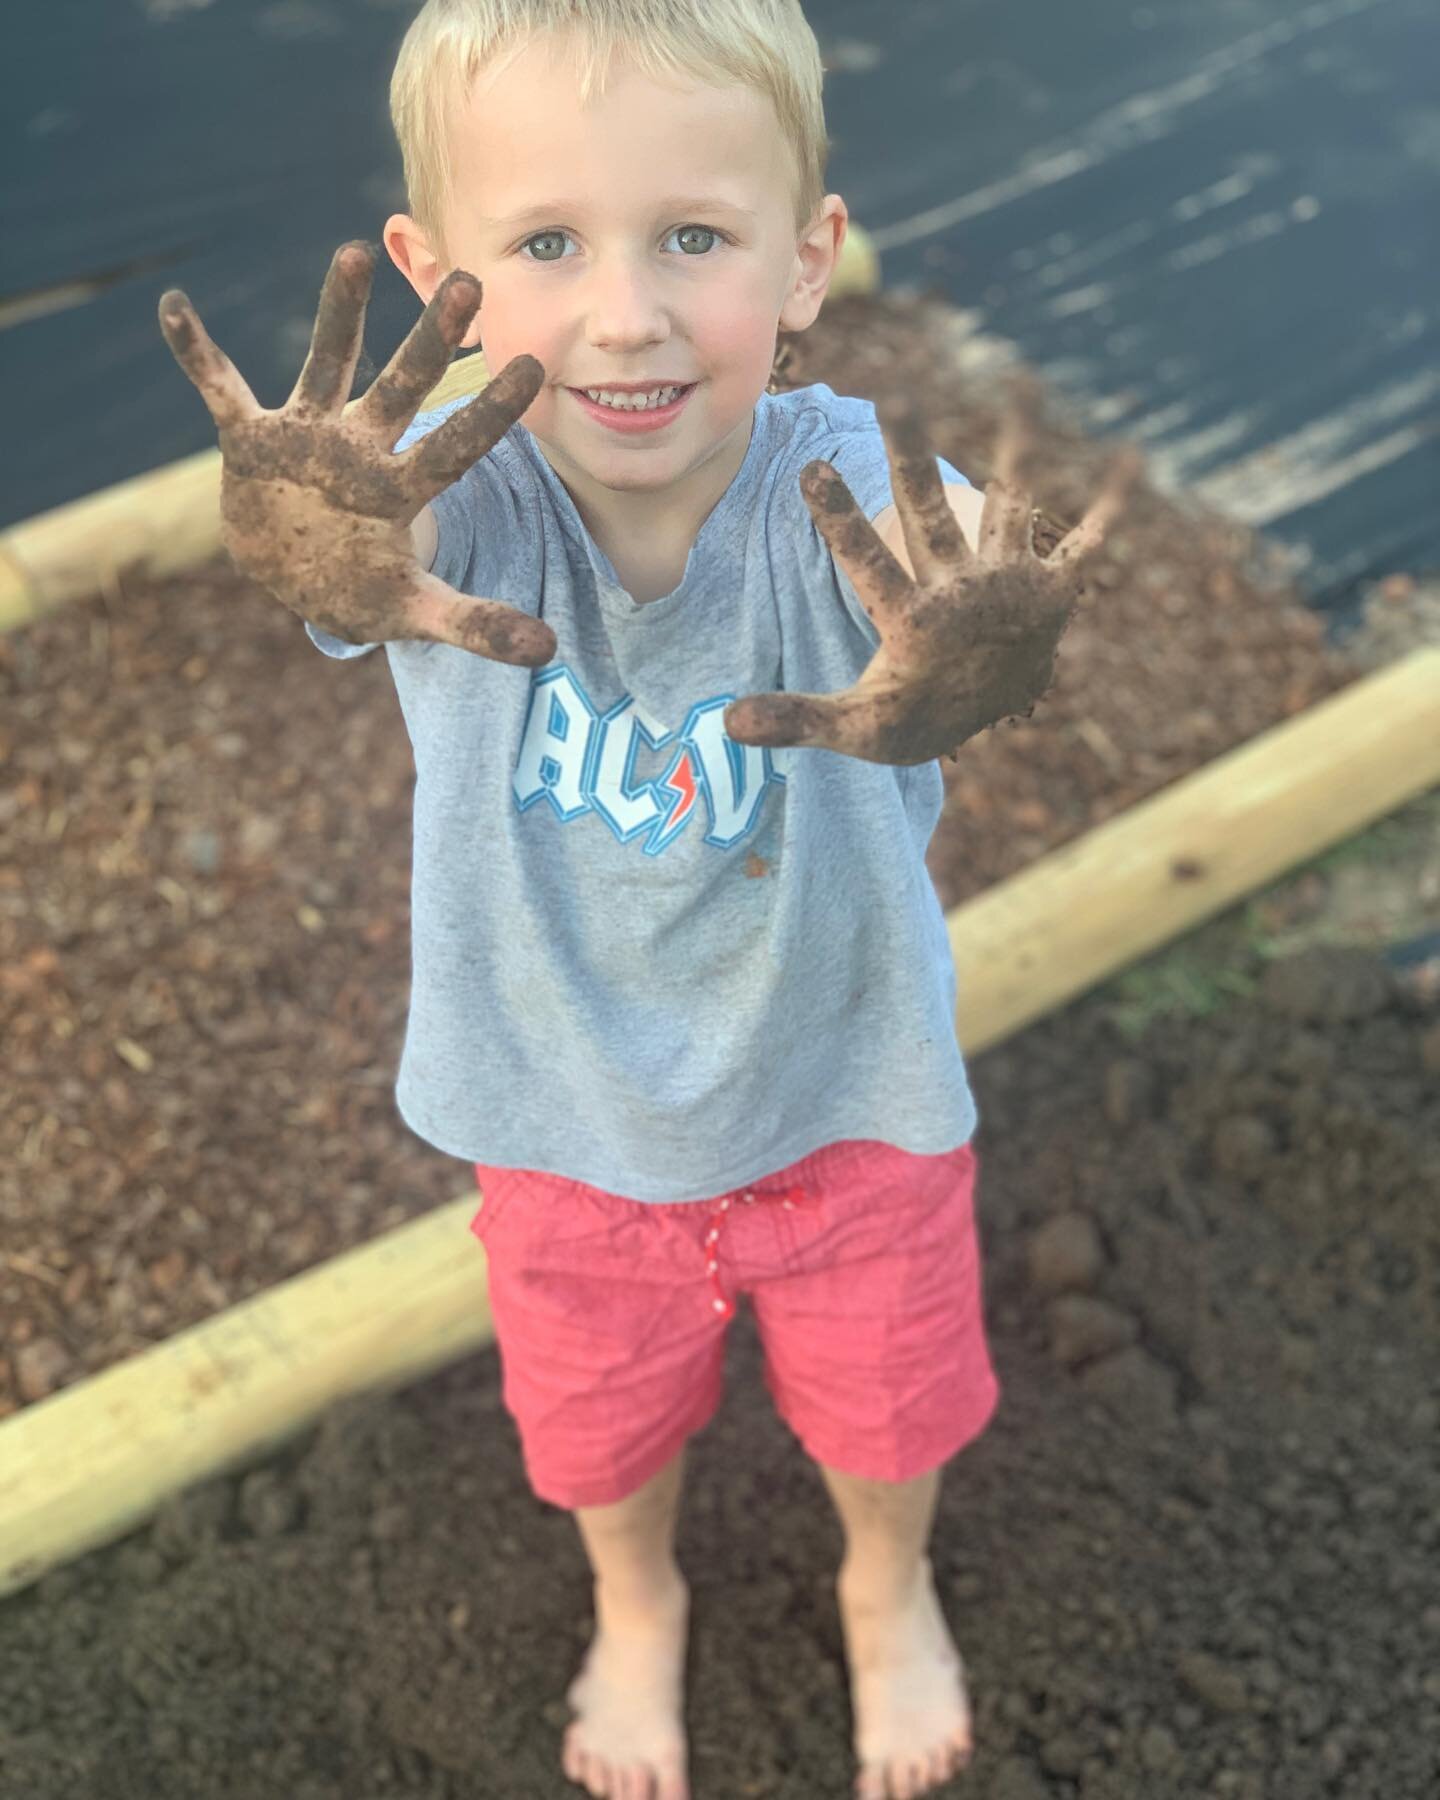 He cut his finger on something and it was bleeding. He said &ldquo;mom, look. It&rsquo;s like the dirt is a lid to my blood. My finger stopped bleeding when I put it in the dirt.&rdquo; 

#littleboys #playinthedirt #gardensofinstagram #zone7 #cutflow